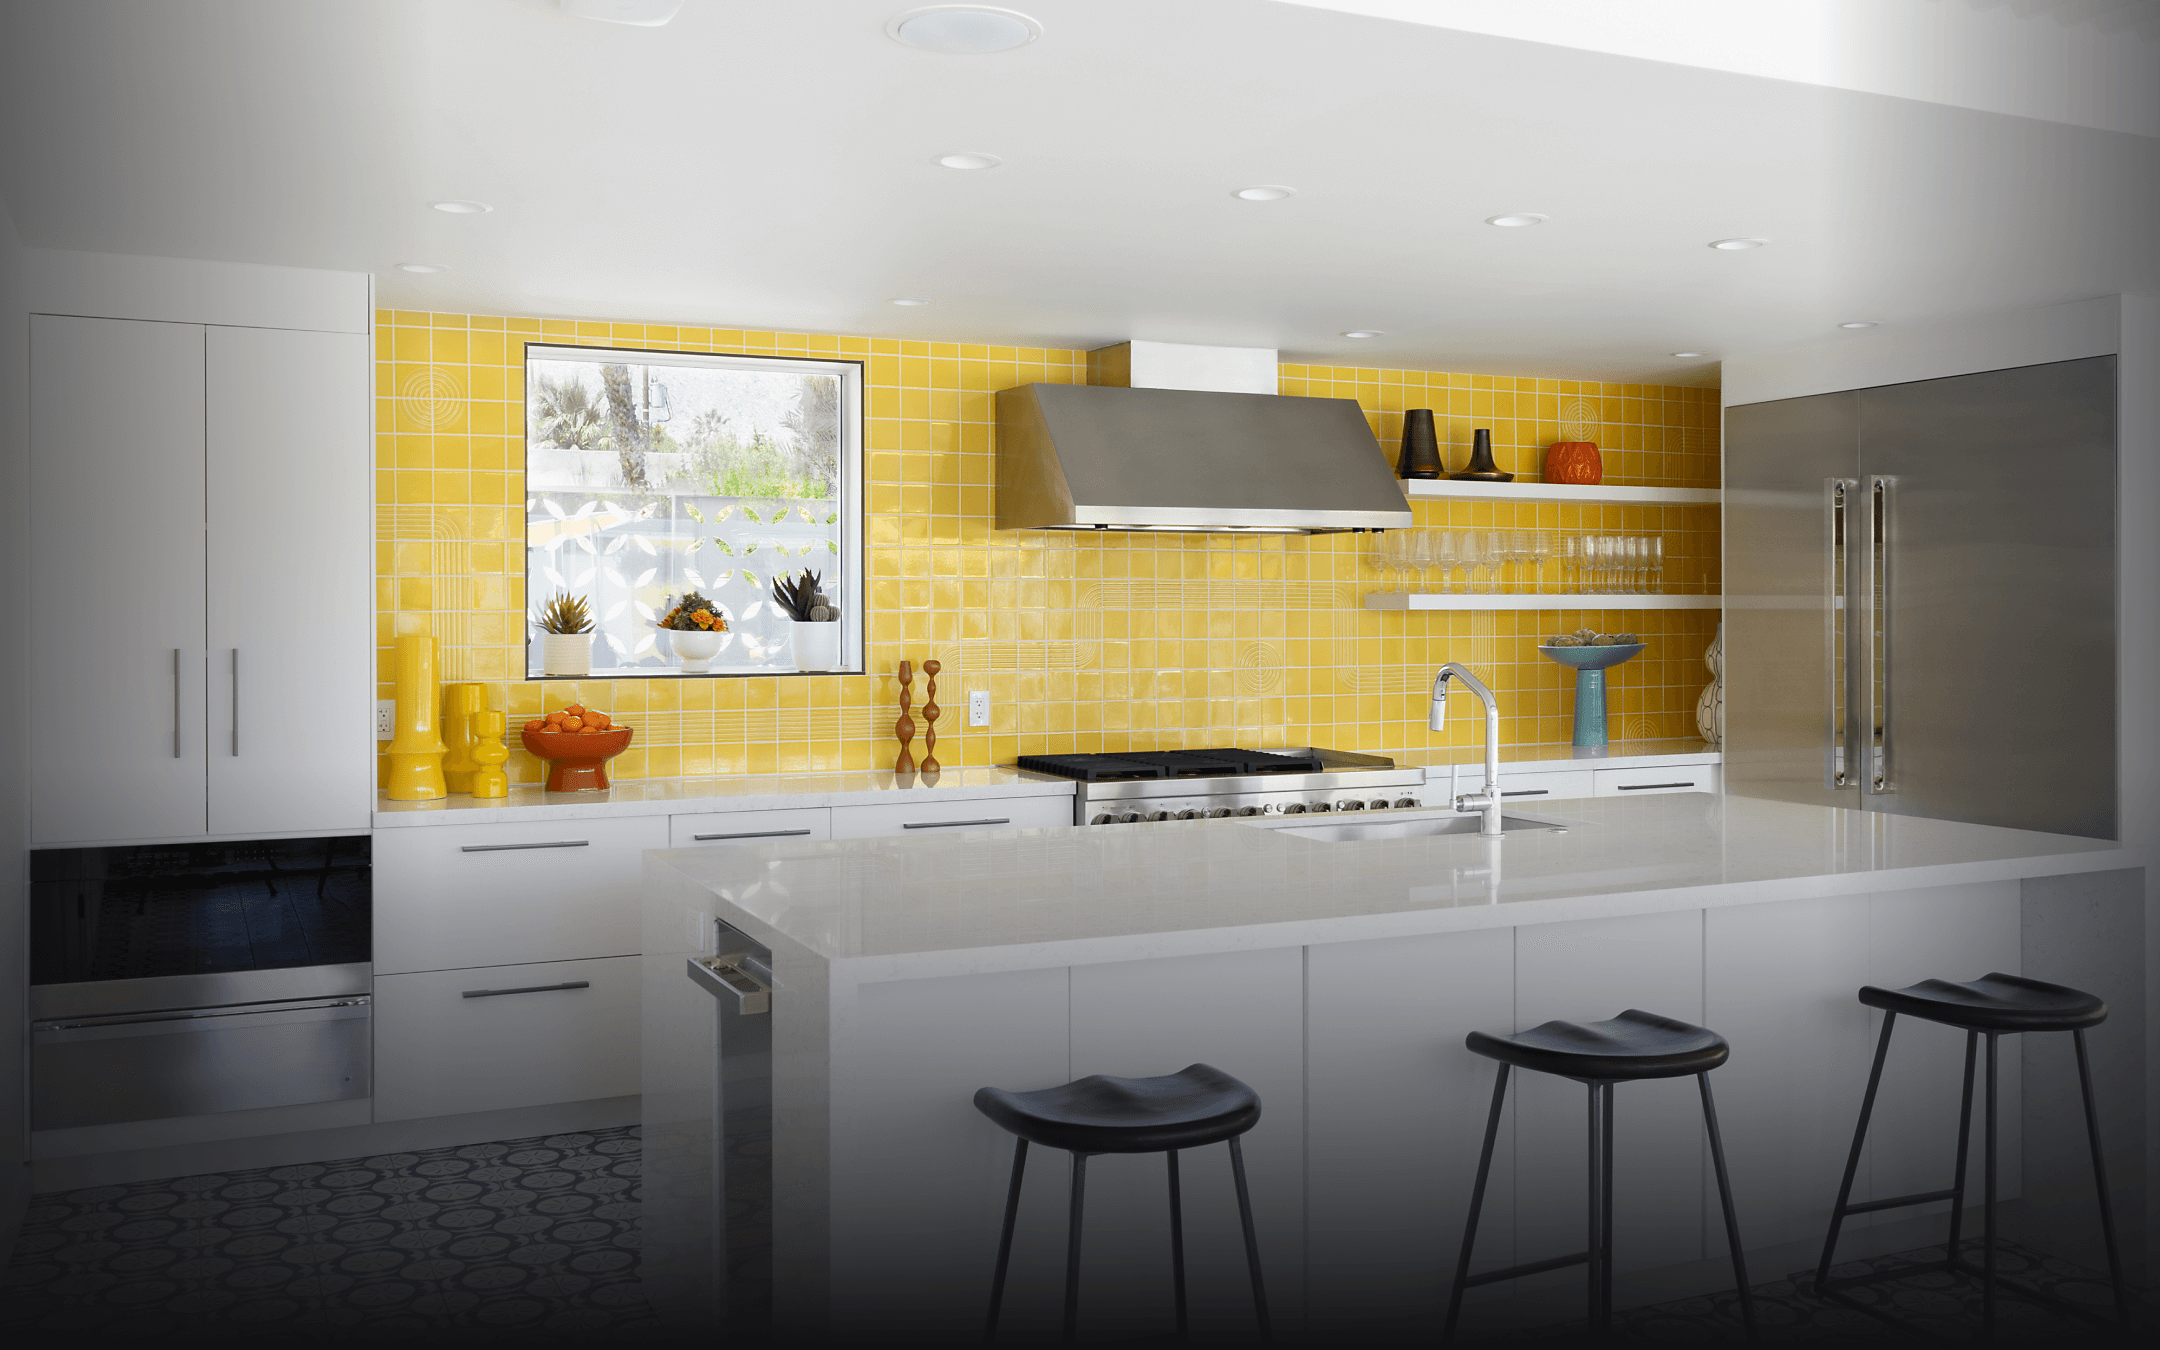 A JennAir® Professional-Style Range in a yellow kitchen.